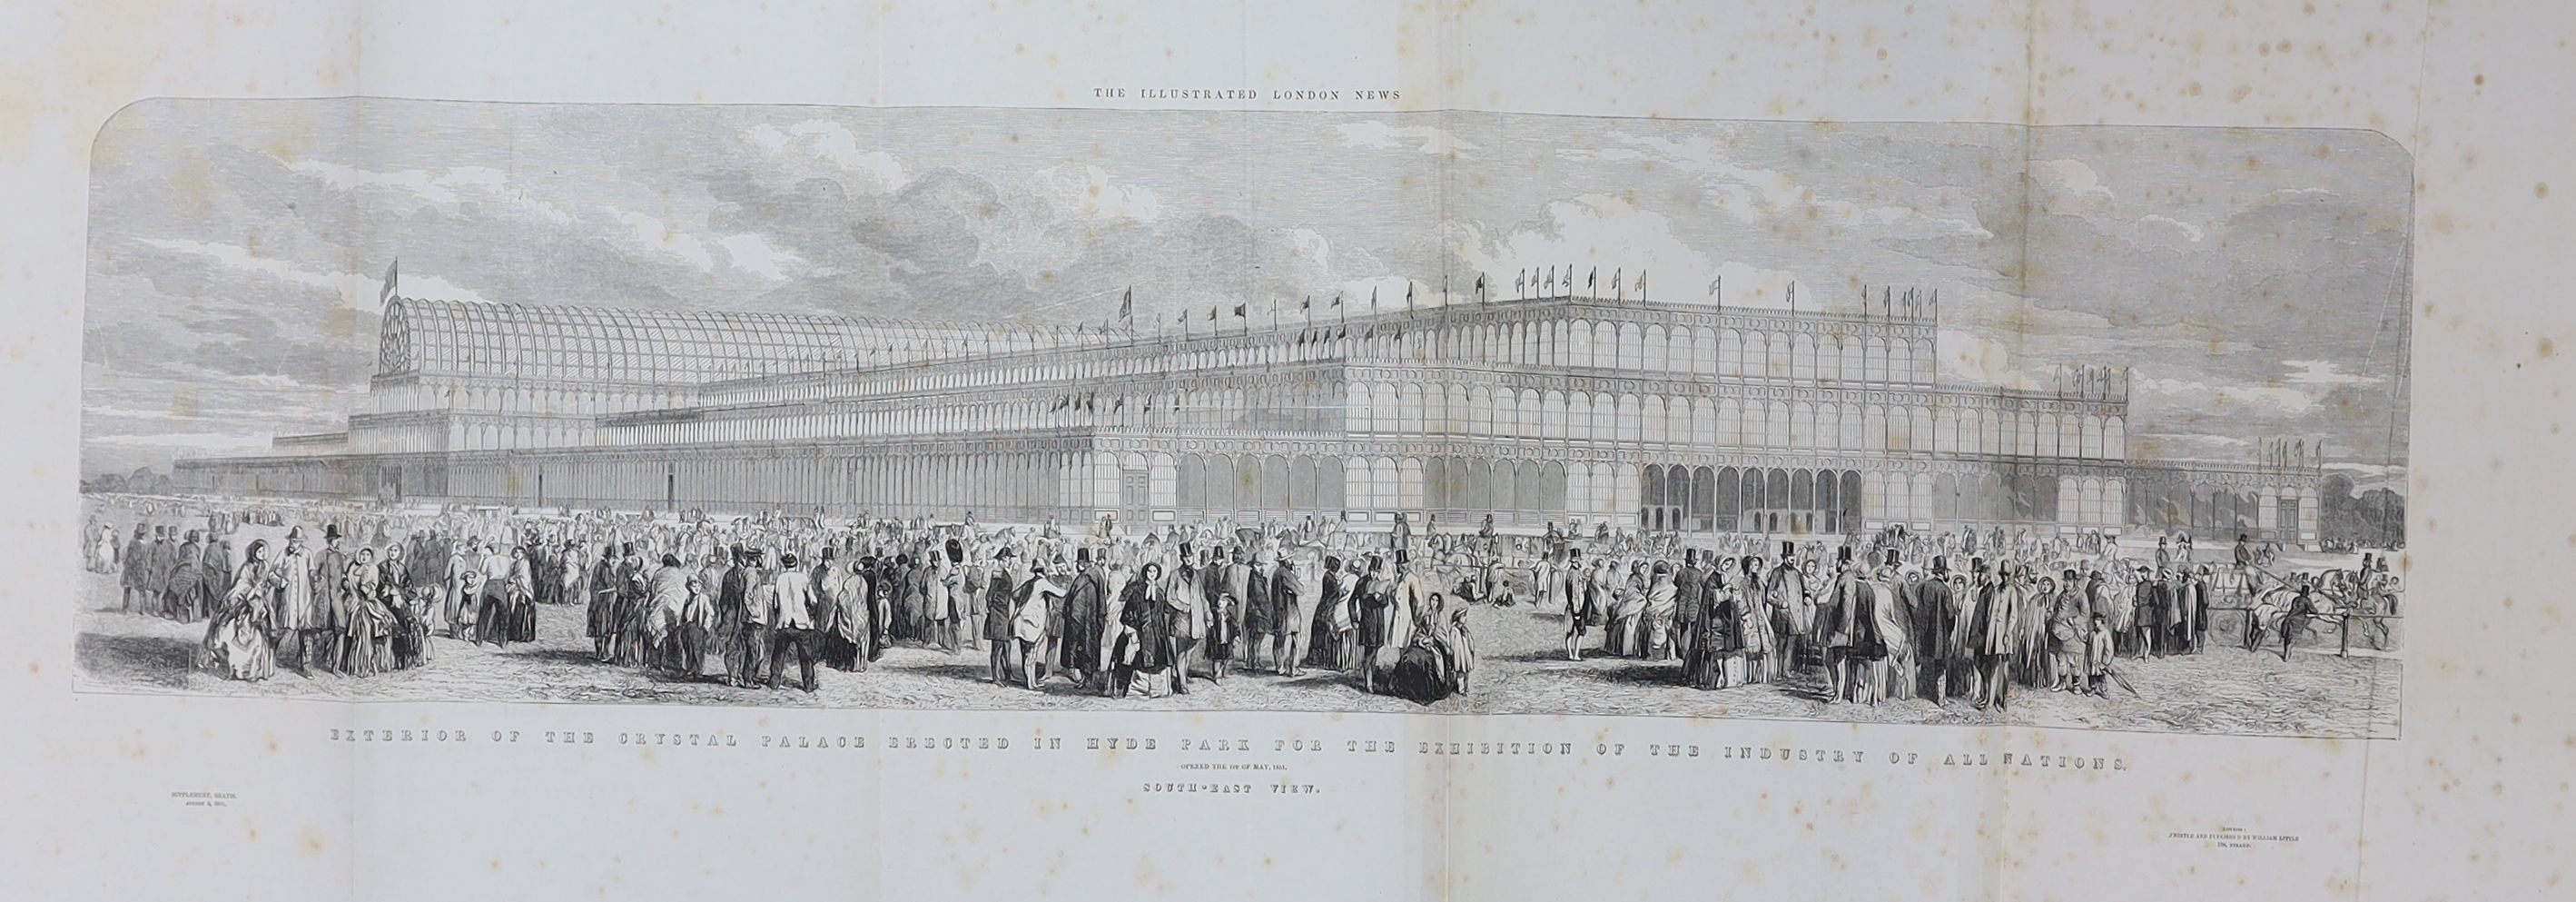 The Illustrated London News, vols 18-21, (Jan. - June, 1851, and July - Dec. 1852) bound in 2, folio, publisher’s cloth gilt, contents include The Great Exhibition at Crystal Palace, London, 1851-52